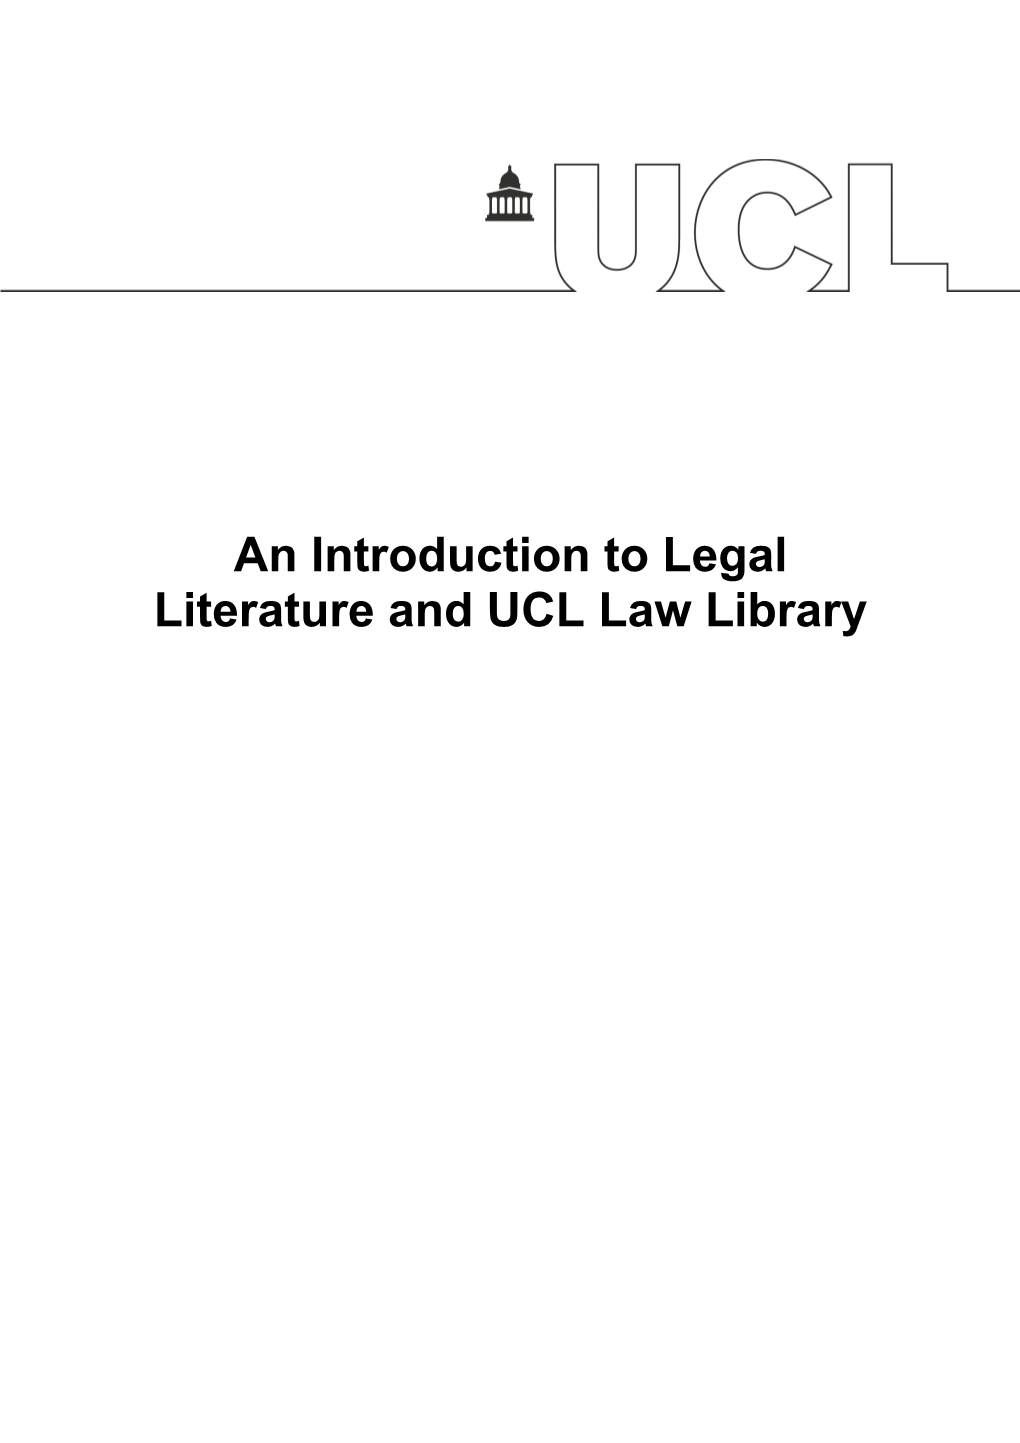 An Introduction to Legal Literature and UCL Law Library